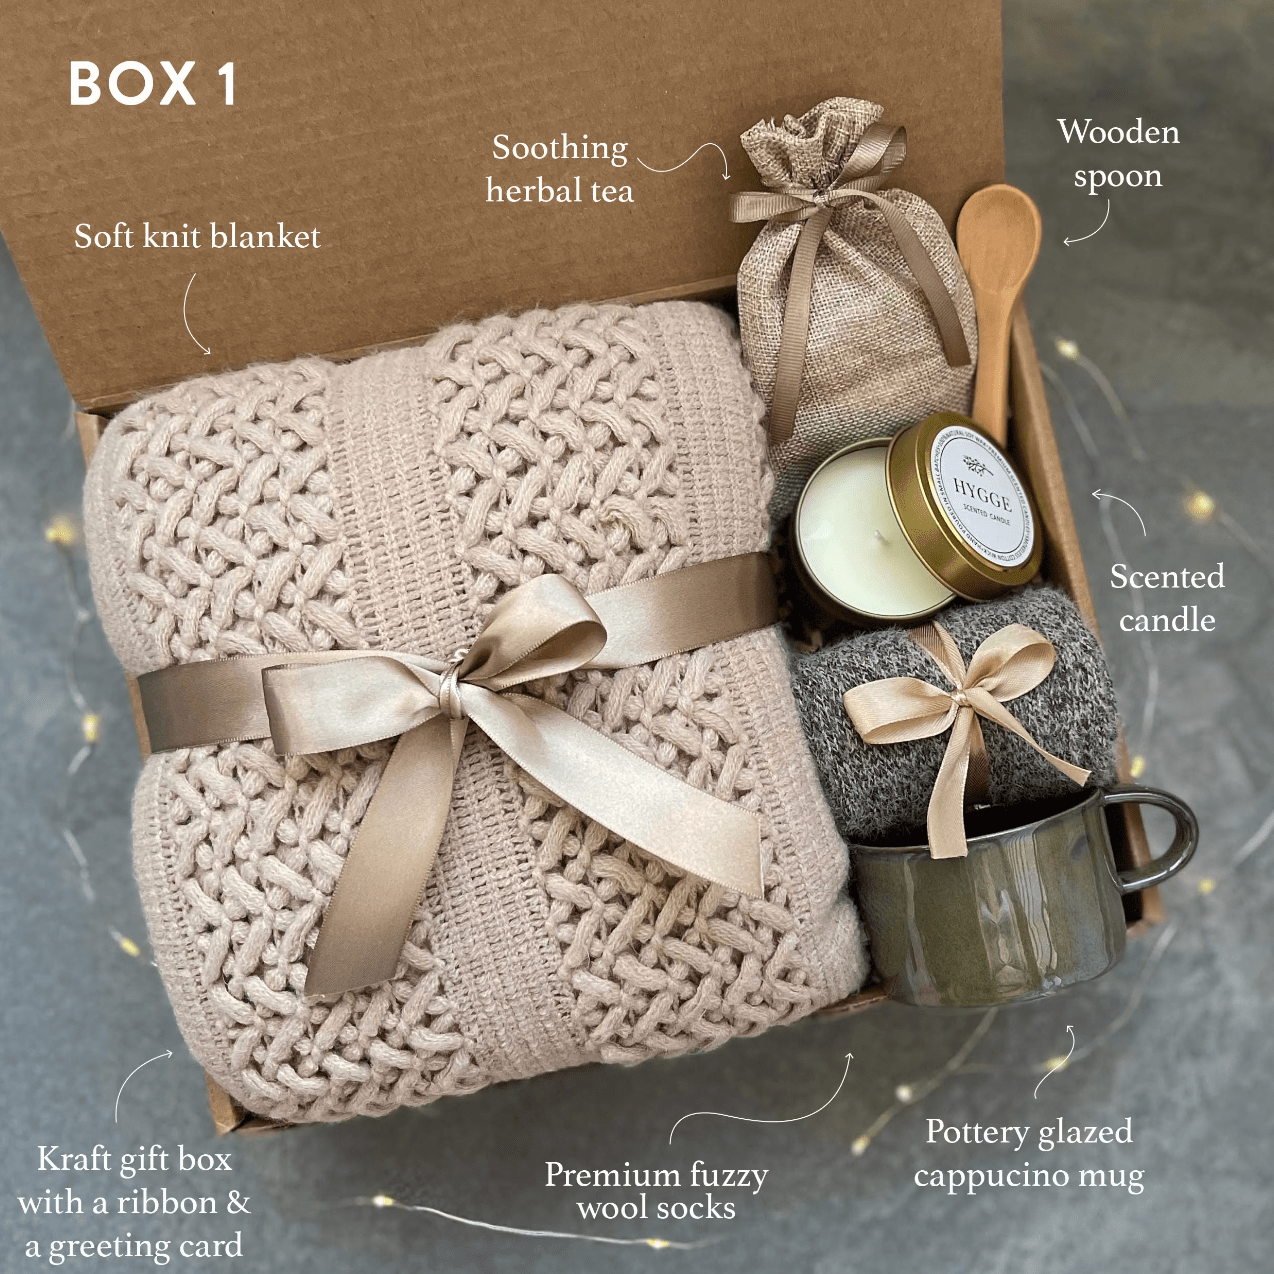 Gifts Box for Women Unique Self Care Christmas Gift Ideas Birthday Gifts  for Mom Best Friend Gift Basket Female Her Sister Wife Personalized  Thinking